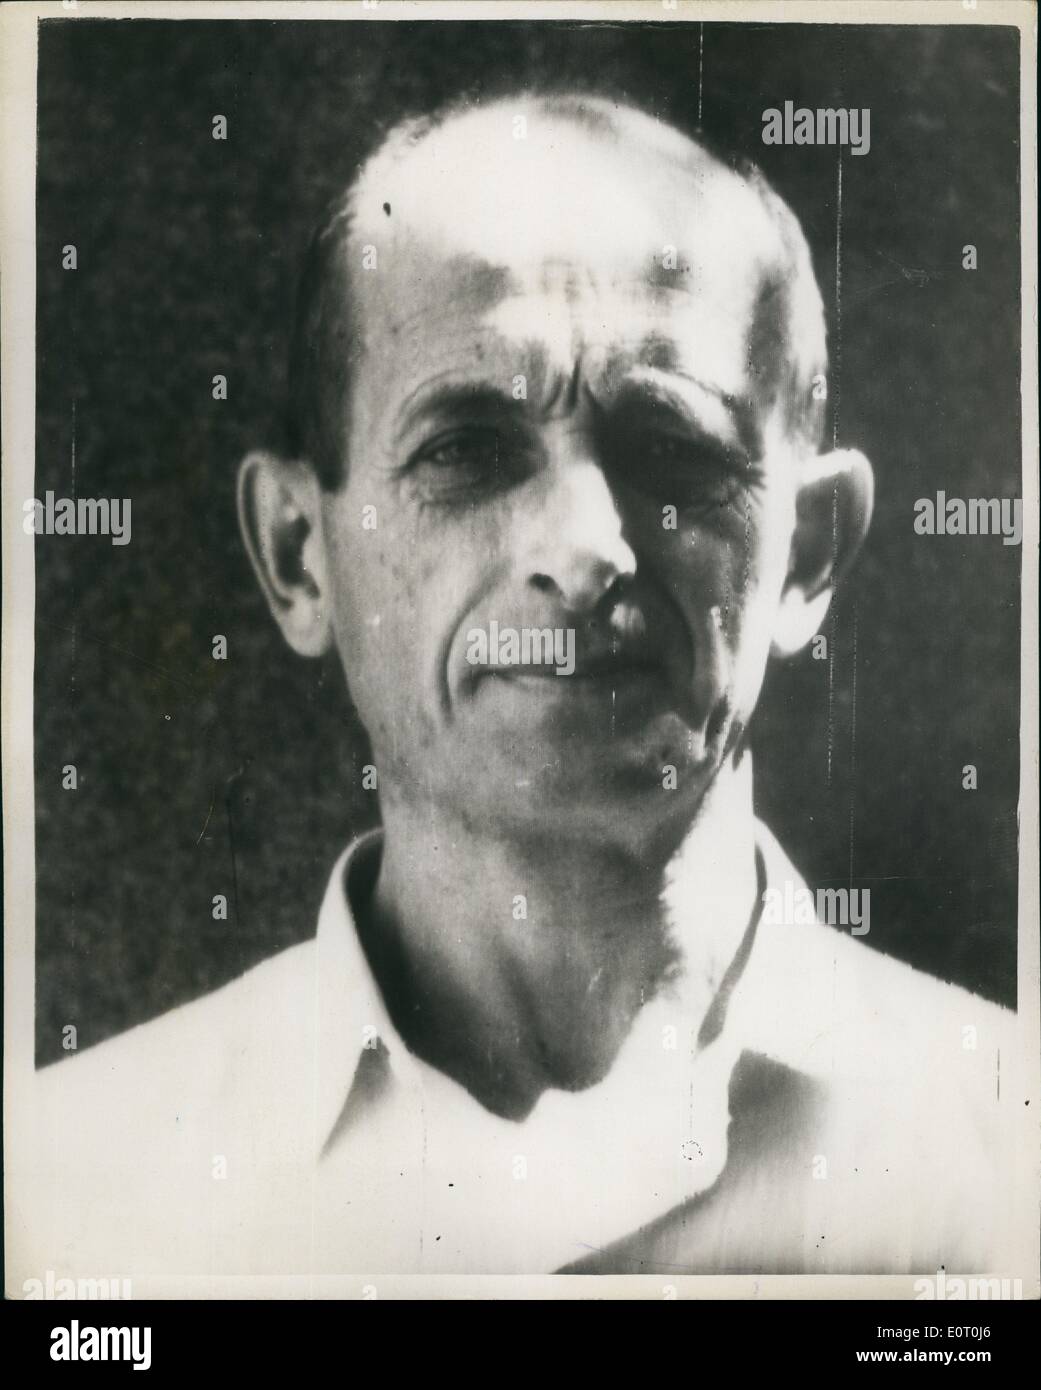 Jun. 06, 1960 - First portrait of Adolf Eichmann since capture by Israeli Intelligence Agents.: This is the first portrait of Adolf Eichmann who is claimed to be the world's most notorious killer - issued today by his captors - Israeli secret service men. He is accused of organising the horrifying efficient system of mans extermination of Jews between the year 1938 - 1945 - by gas chamber and other methods. Eichmann is now 53. Eichmann was arrested in the Argentine by secret agents of the Israeli Government - after months of careful investigation. Stock Photo